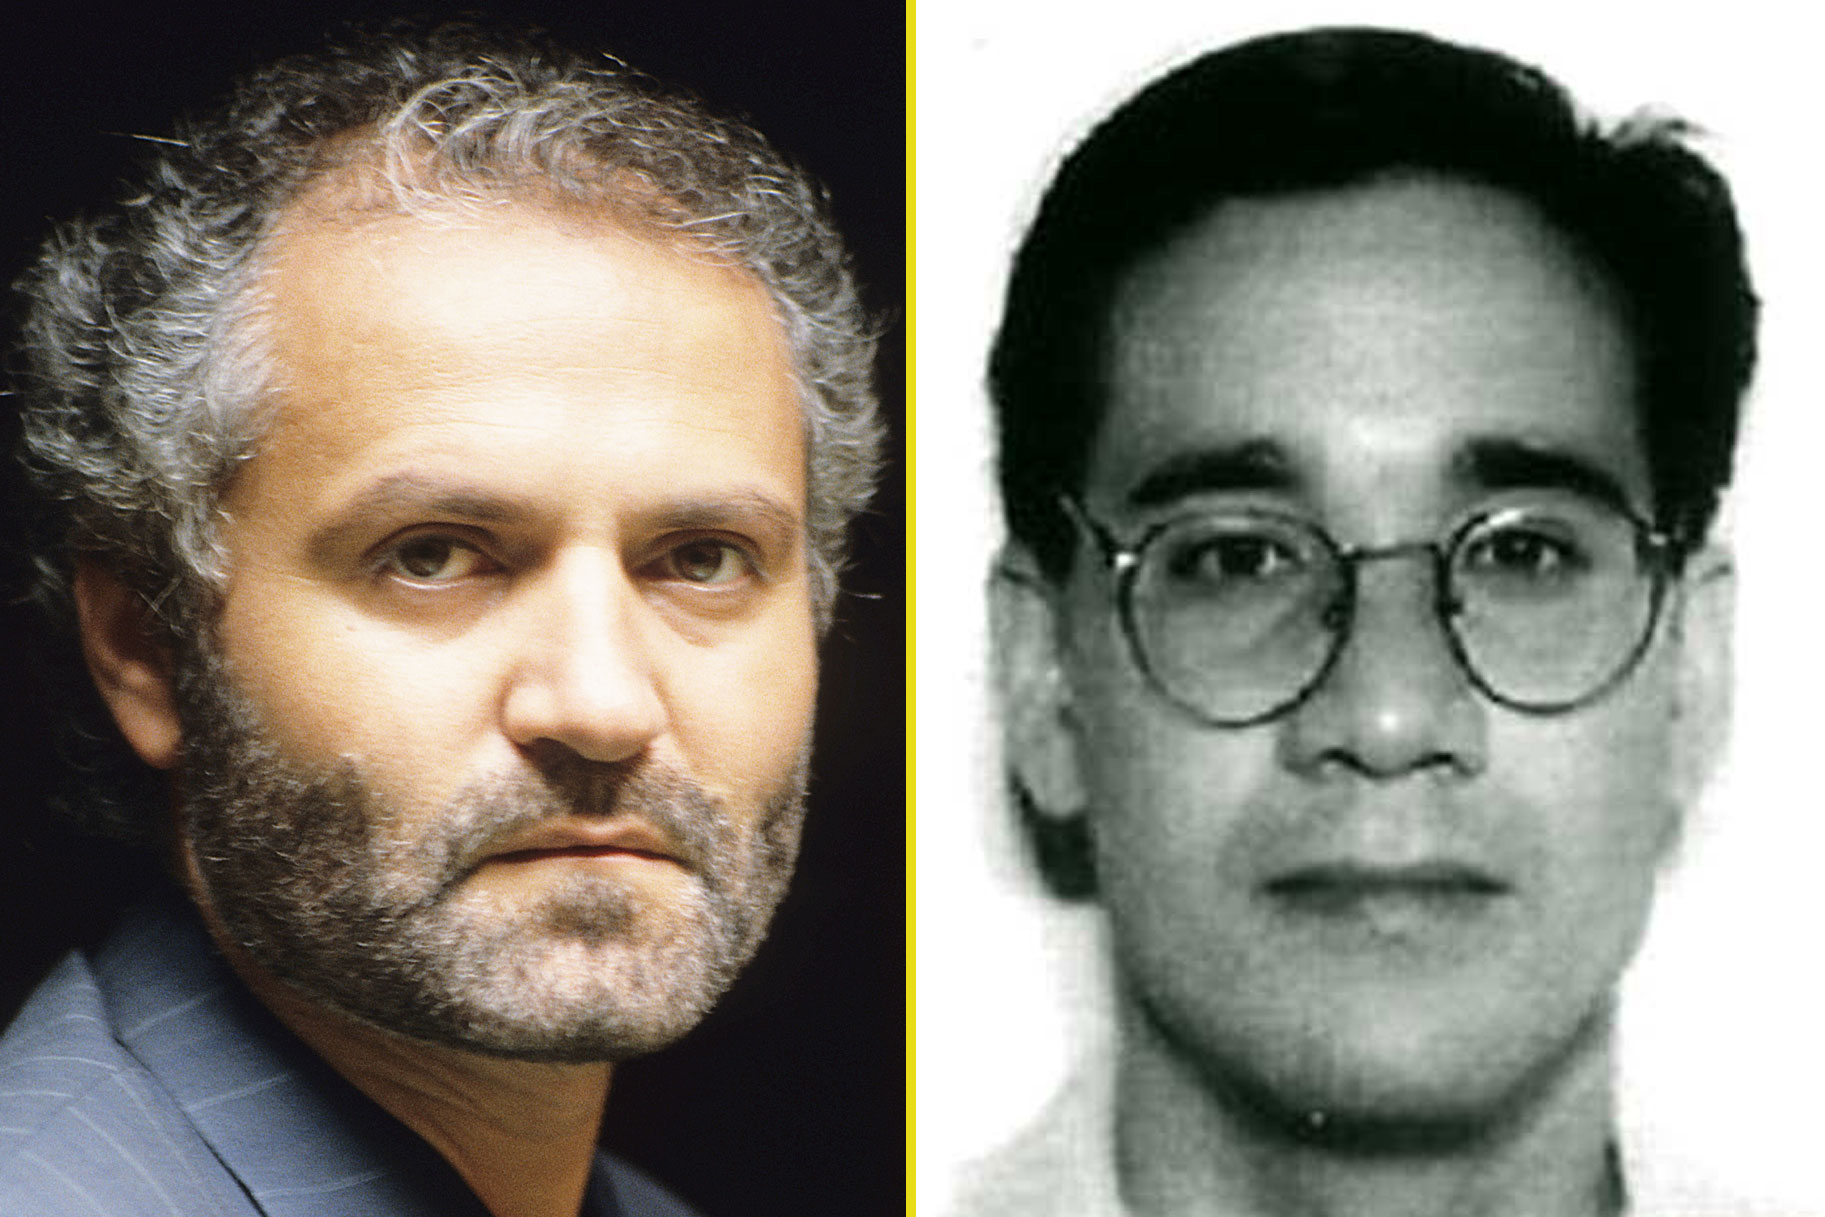 Gianni Versace and Andrew Cunanan